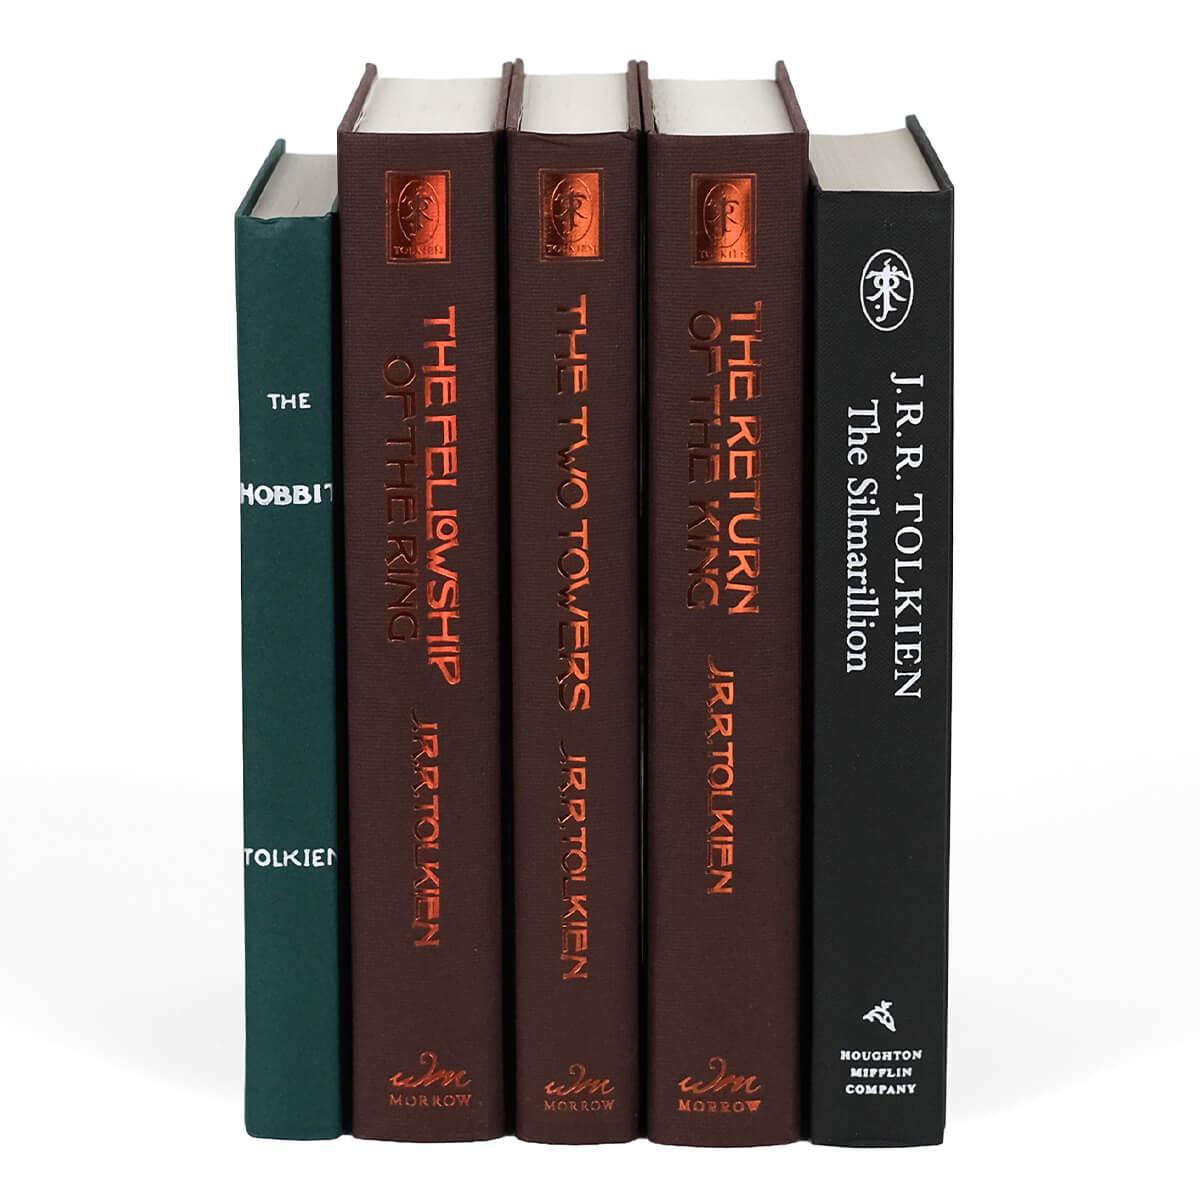 Unjacketed spines of books in the Tolkien's Epic Journey Book Set. Books in Feature author, book title, and publisher on the spine.